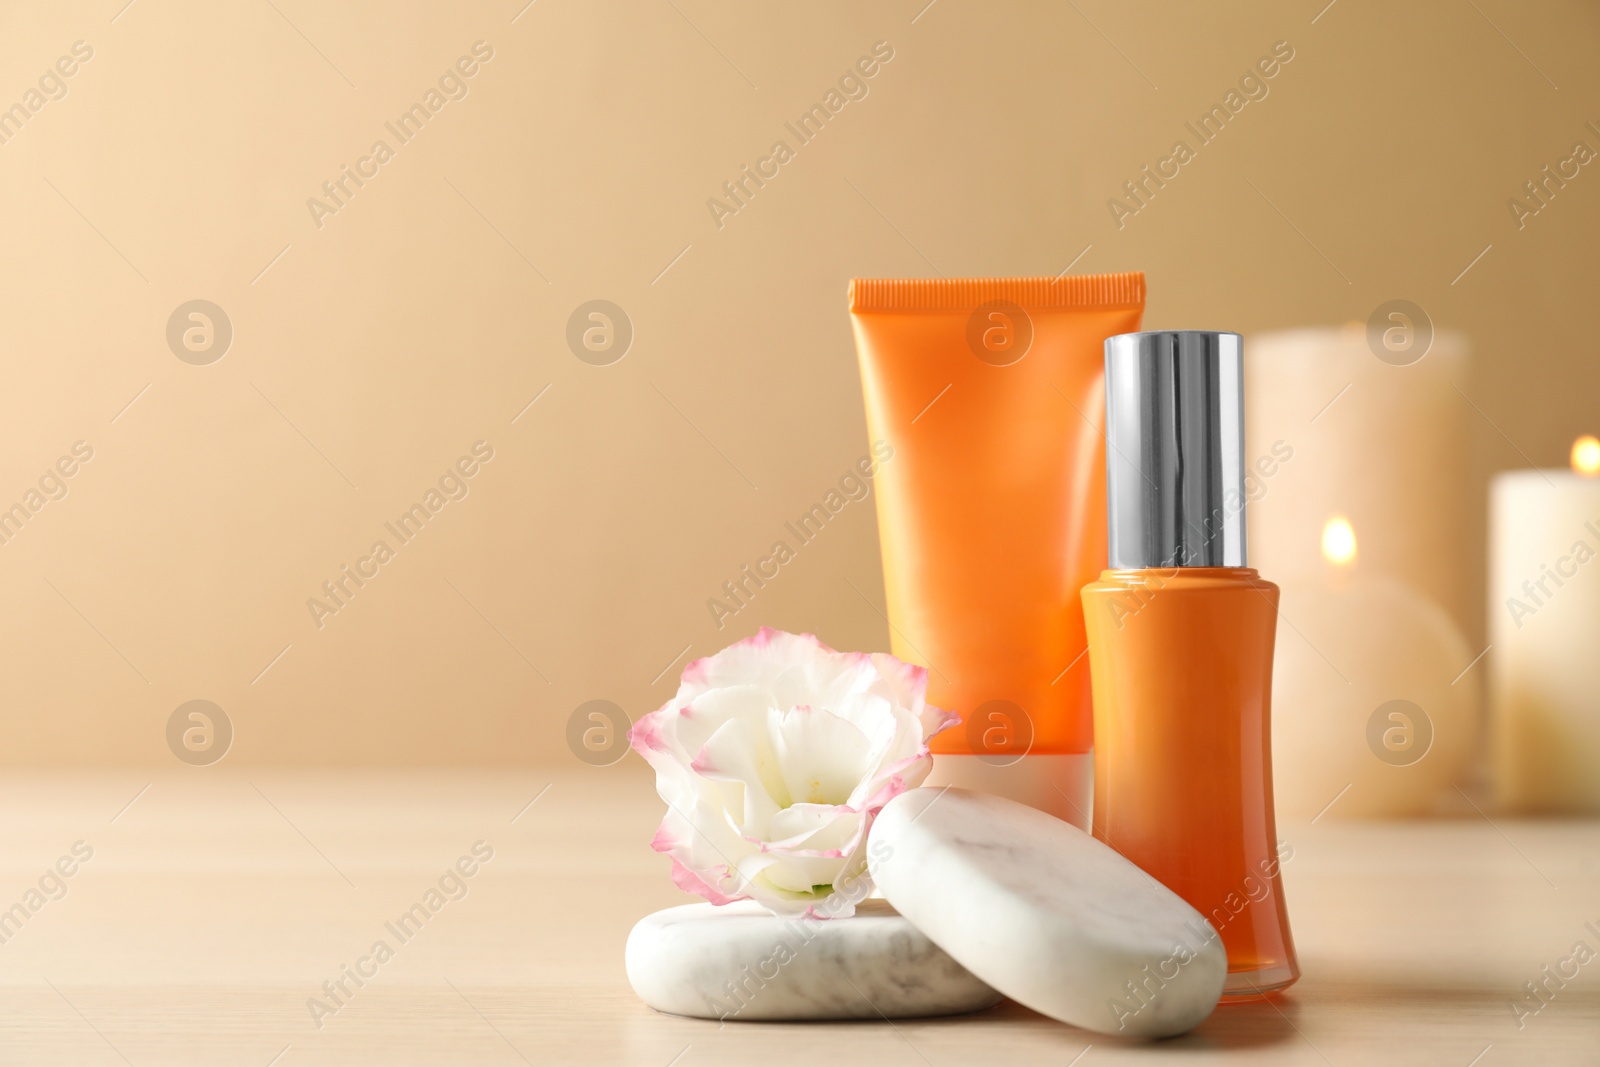 Photo of Cosmetic products, flower and spa stones on wooden table. Space for text